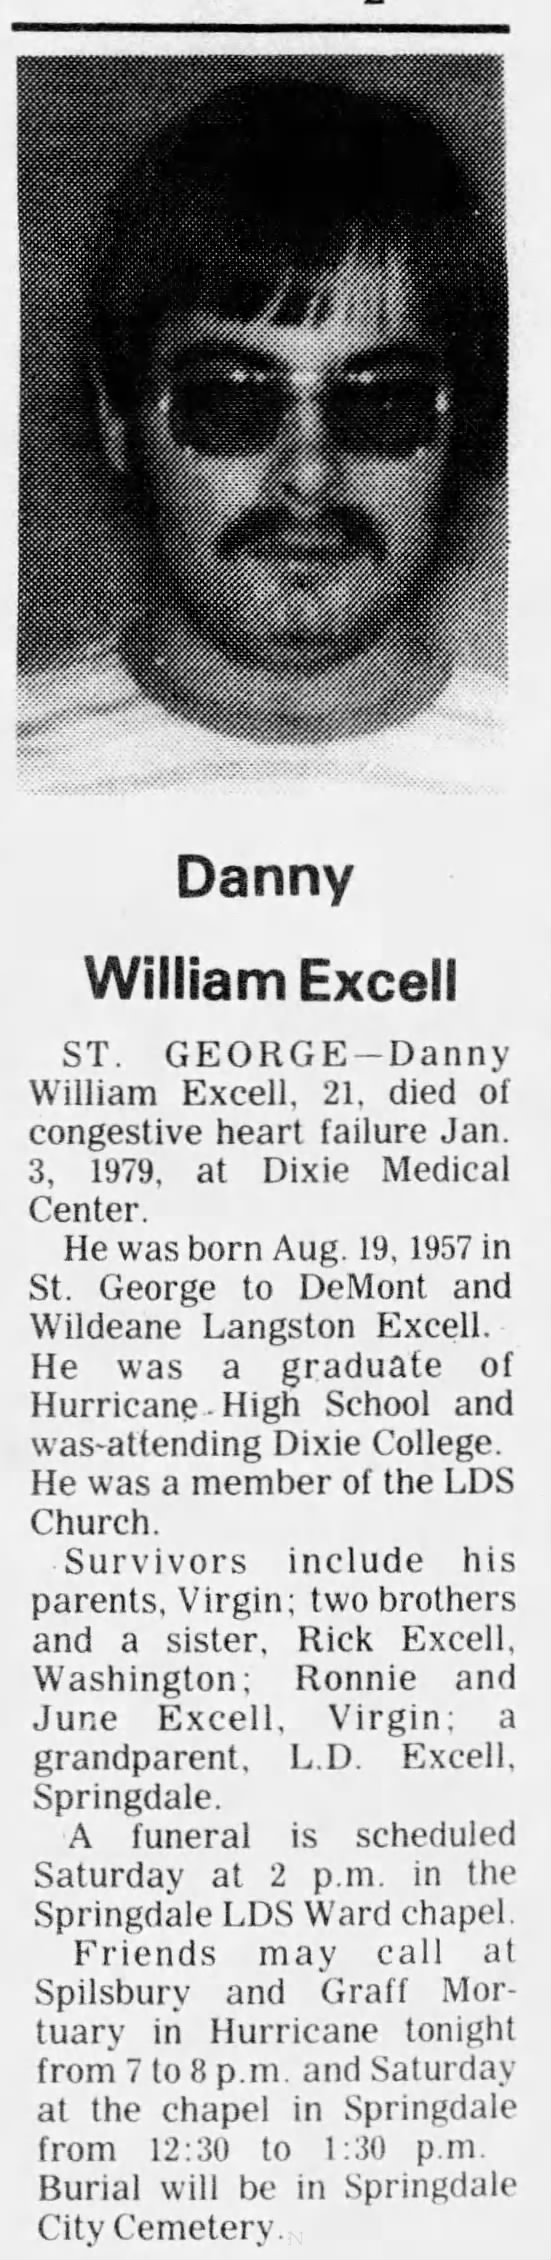 Danny William Excell; Obit.